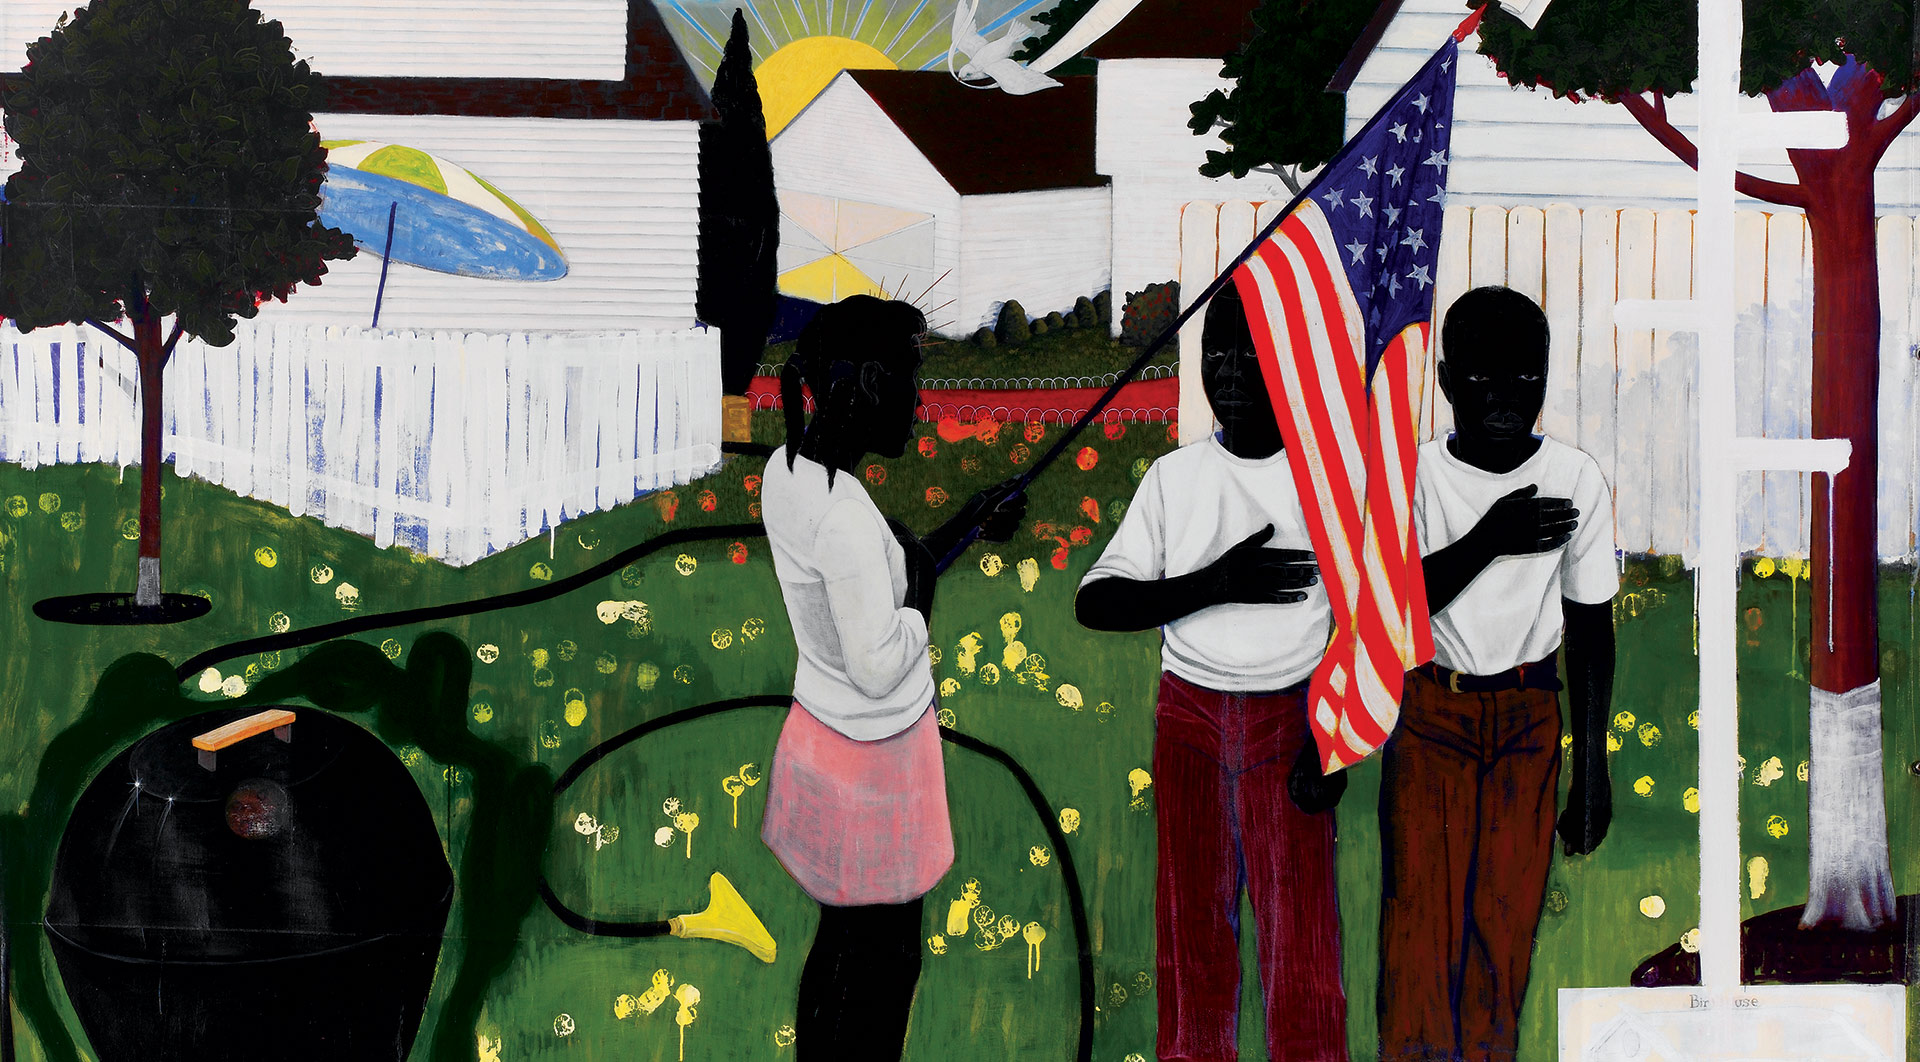 A detail from a painting by Kerry James Marshall, titled Bang, dated 1994.